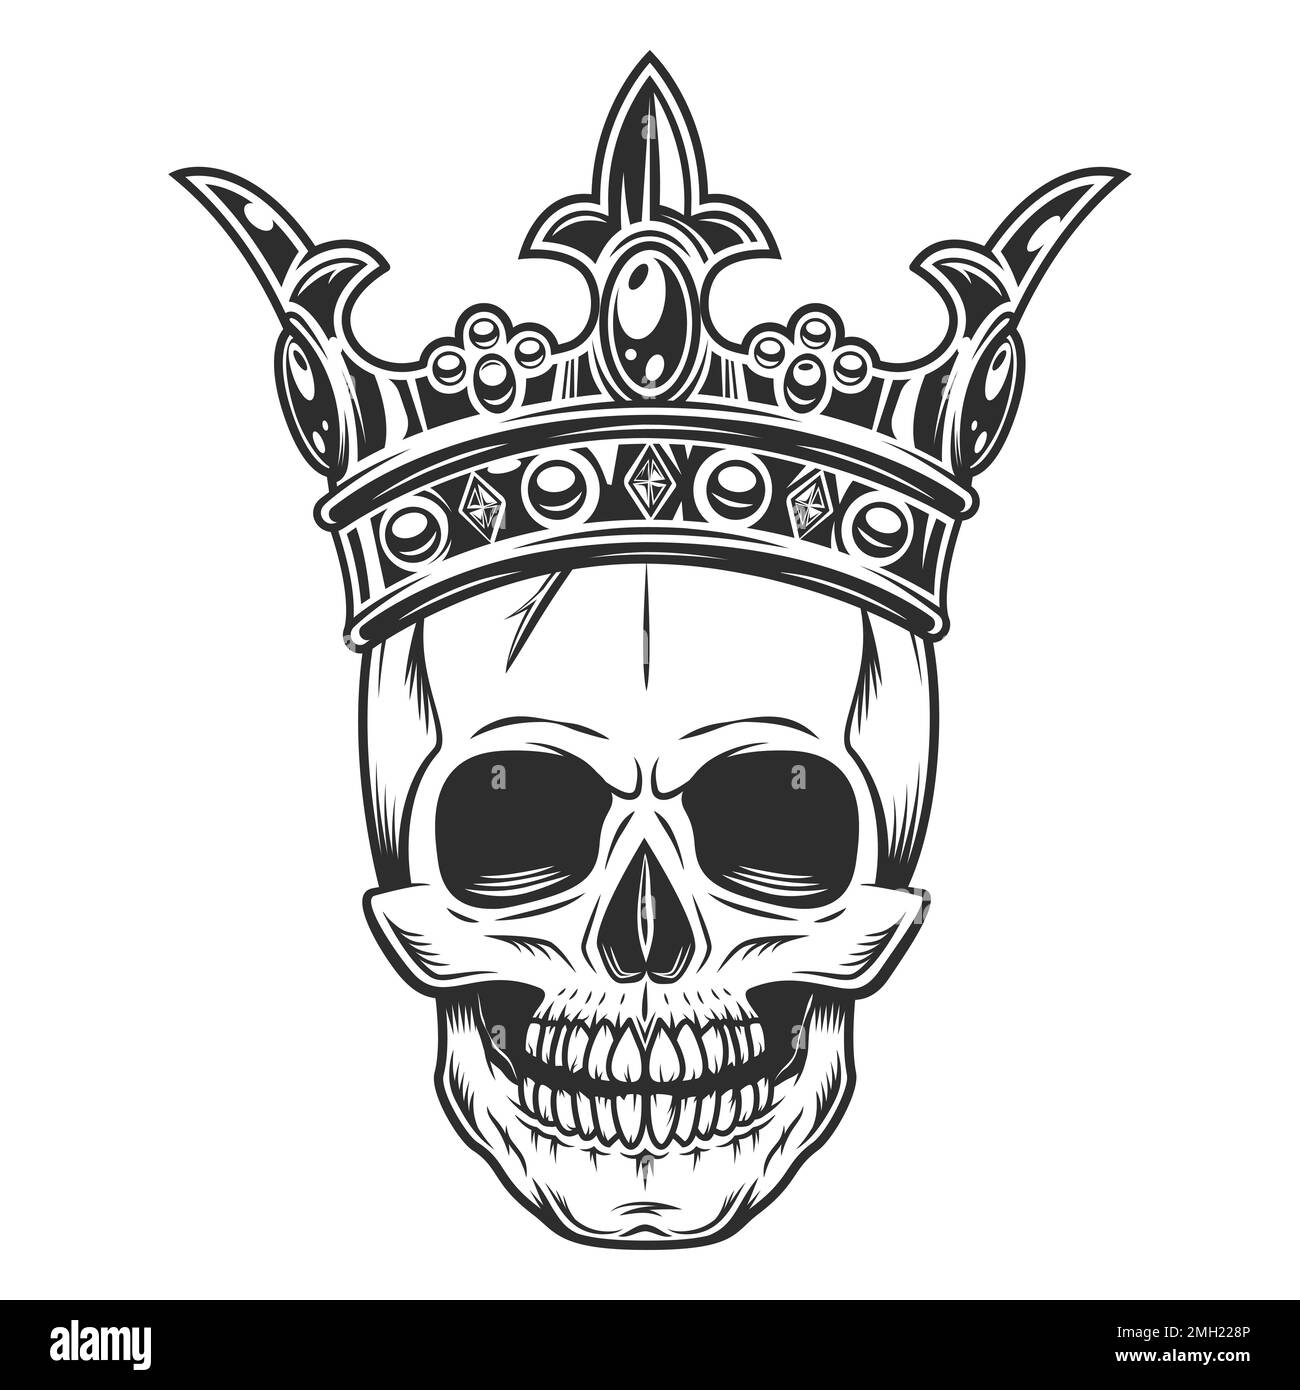 Skull in crown king monochrome illustration isolated on white background. Vintage crowning, elegant queen or king crowns, royal imperial coronation Stock Vector